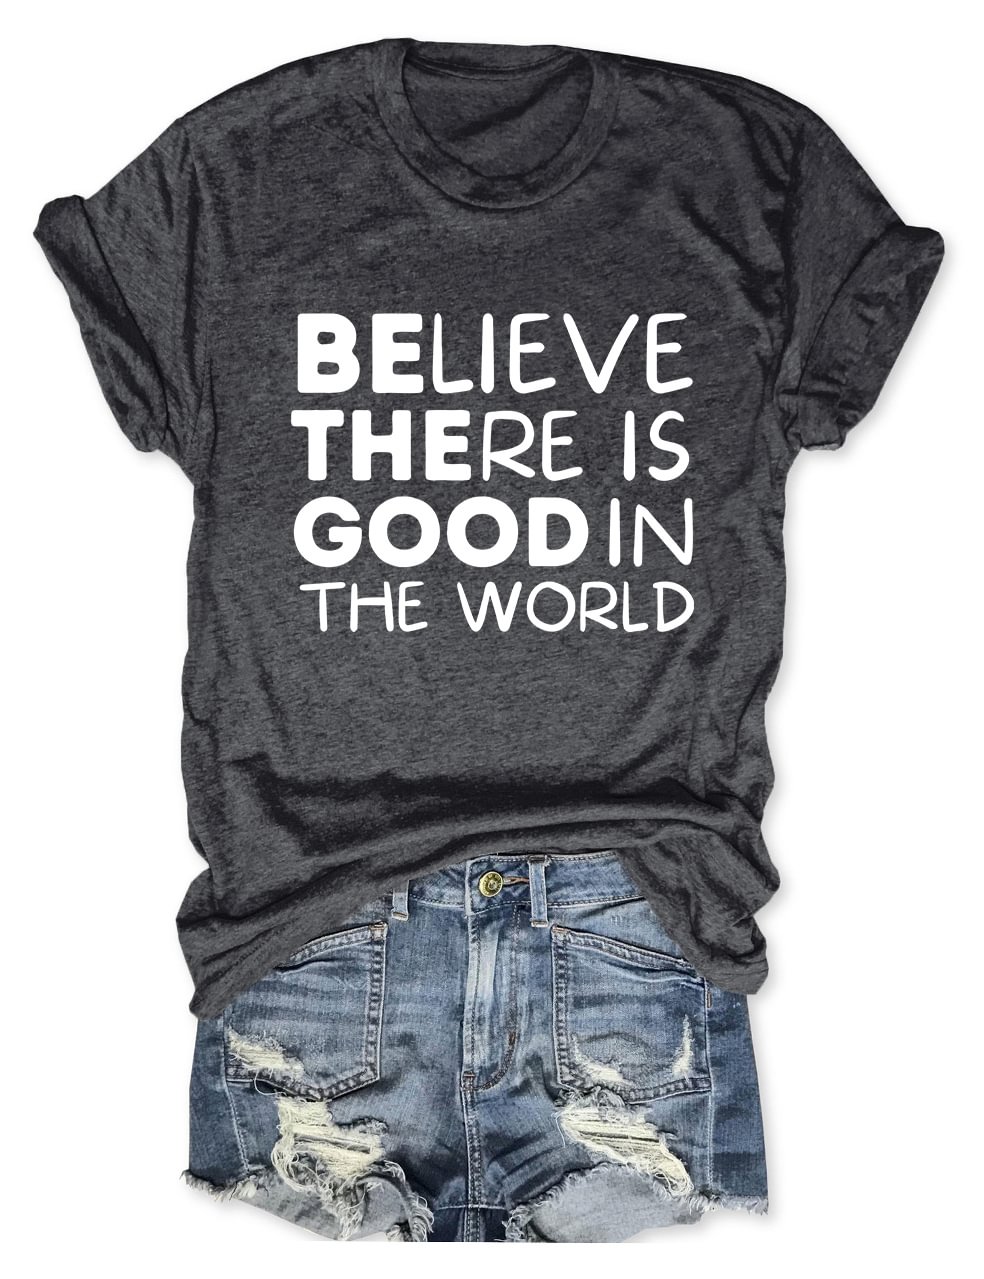 Believe There is Good in the World T-Shirt